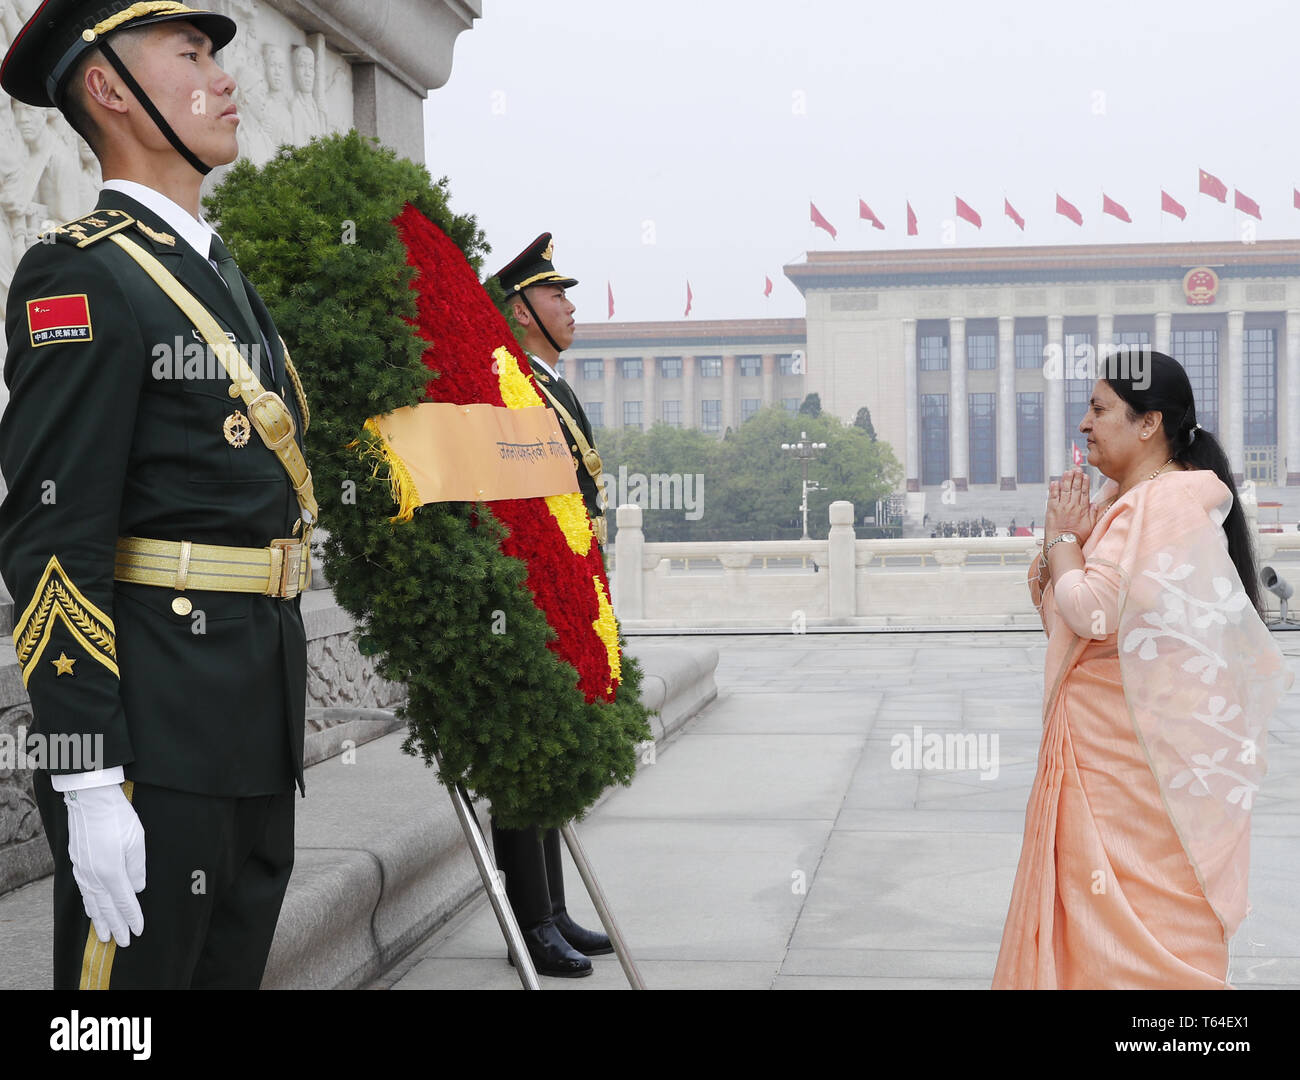 Beijing, China. 29th Apr, 2019. Nepali President Bidhya Devi Bhandari lays a wreath at the Monument to the People's Heroes at the Tian'anmen Square in Beijing, capital of China, April 29, 2019. Credit: Liu Bin/Xinhua/Alamy Live News Stock Photo